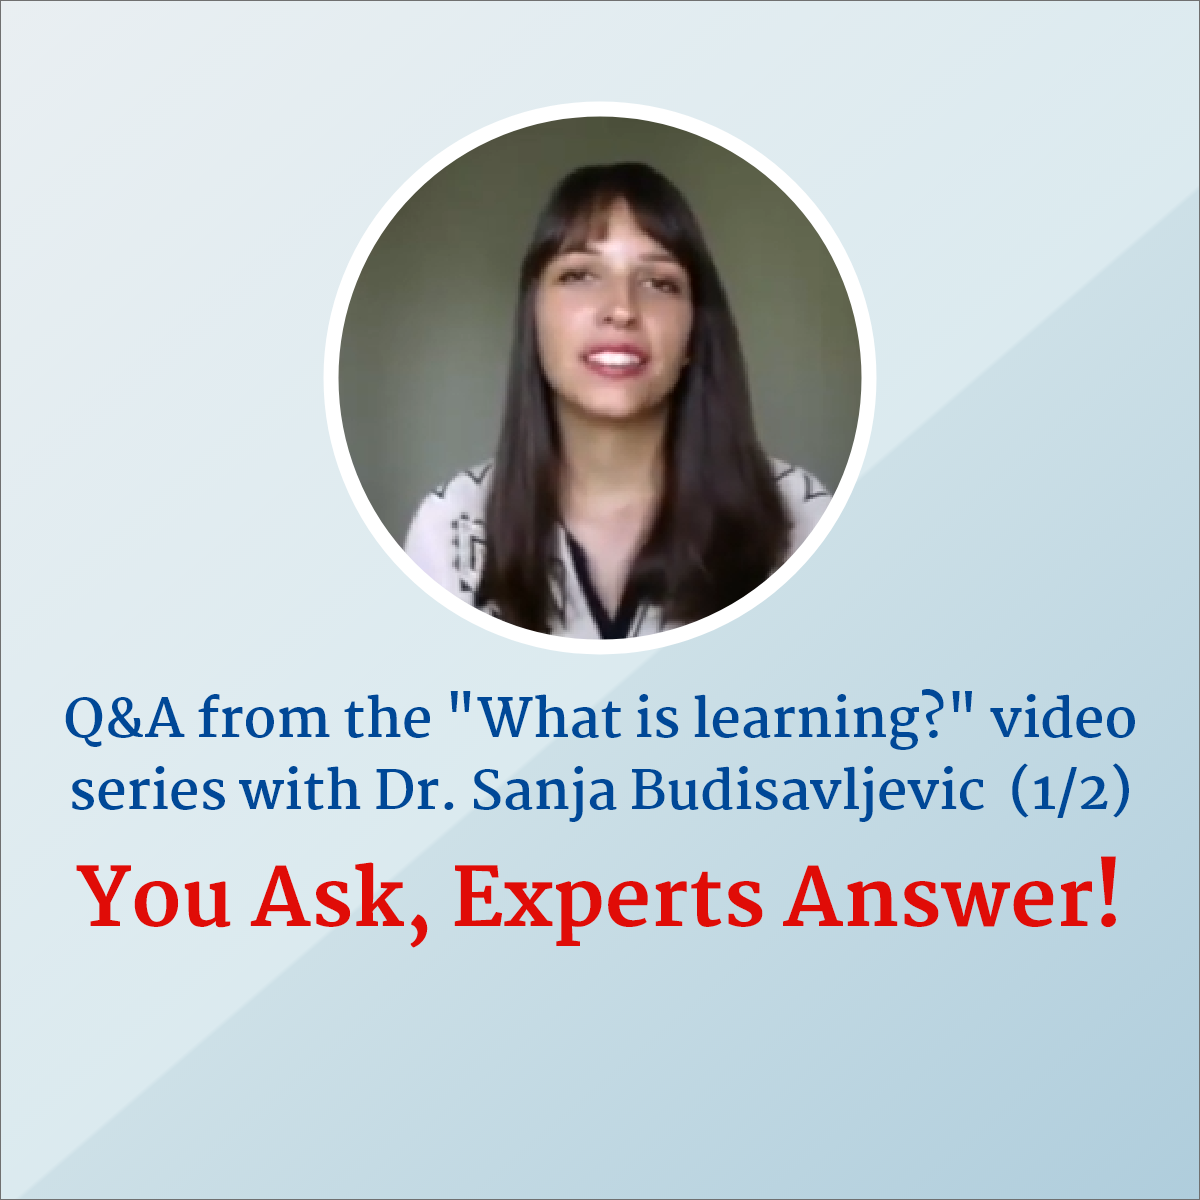 Q&A from the "What is Learning?" video series - Spatio-temporal Dynamics of Brain Development - Dr. Sanja Budisavljevic.